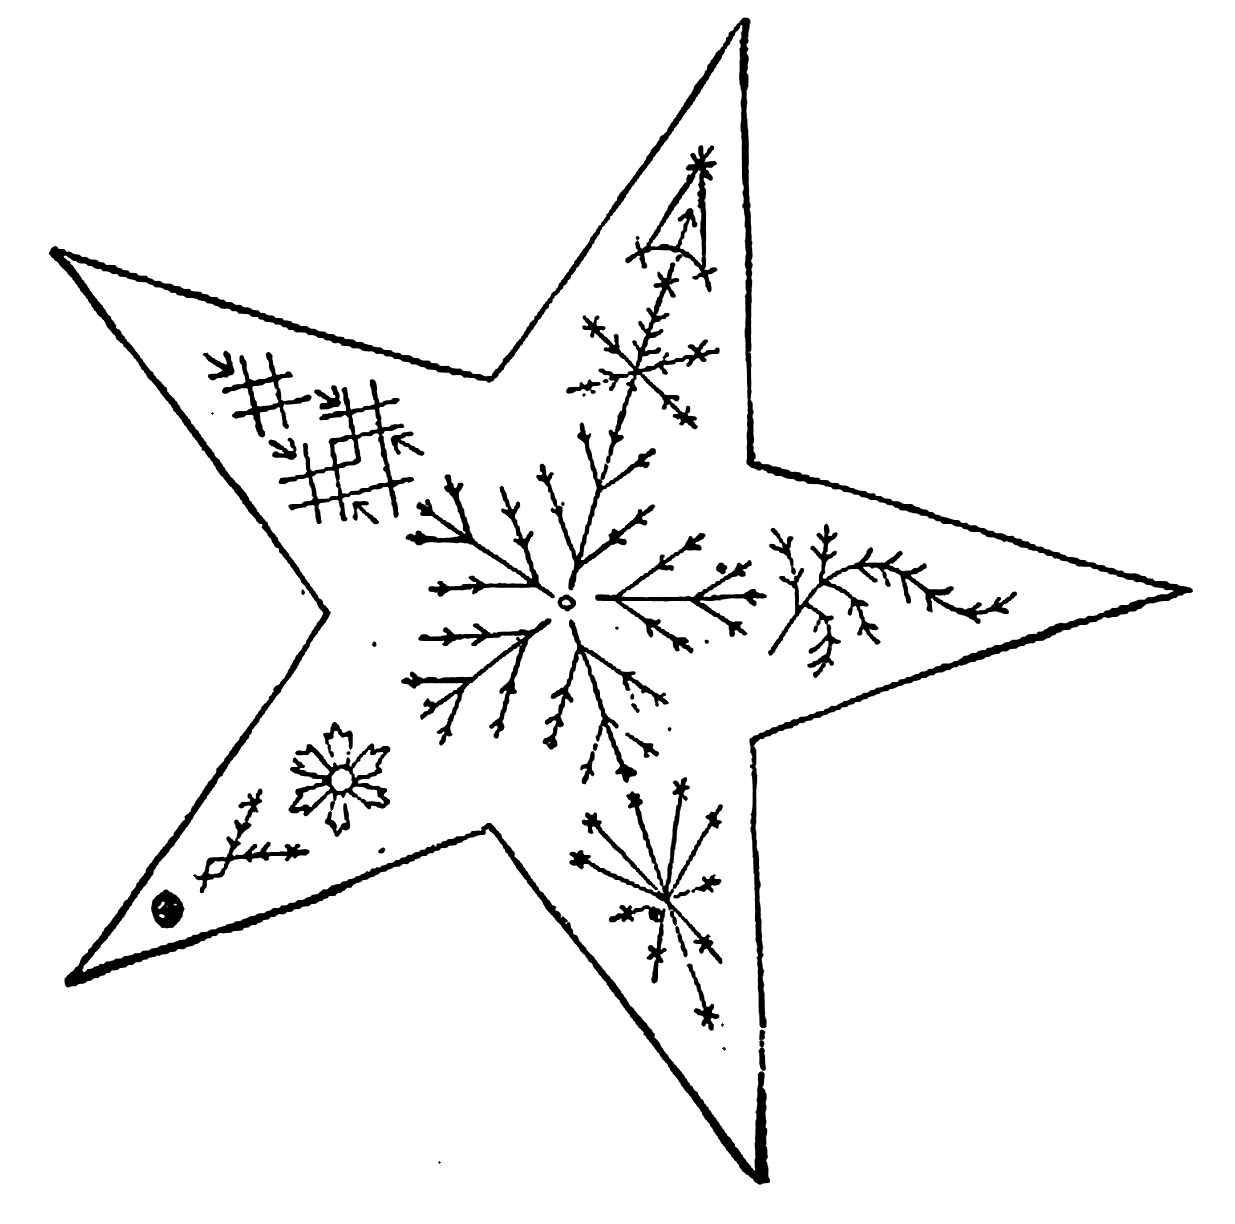 Free Vintage Embroidery Patterns Vintage Embroidery Pattern Star The Graffical Muse